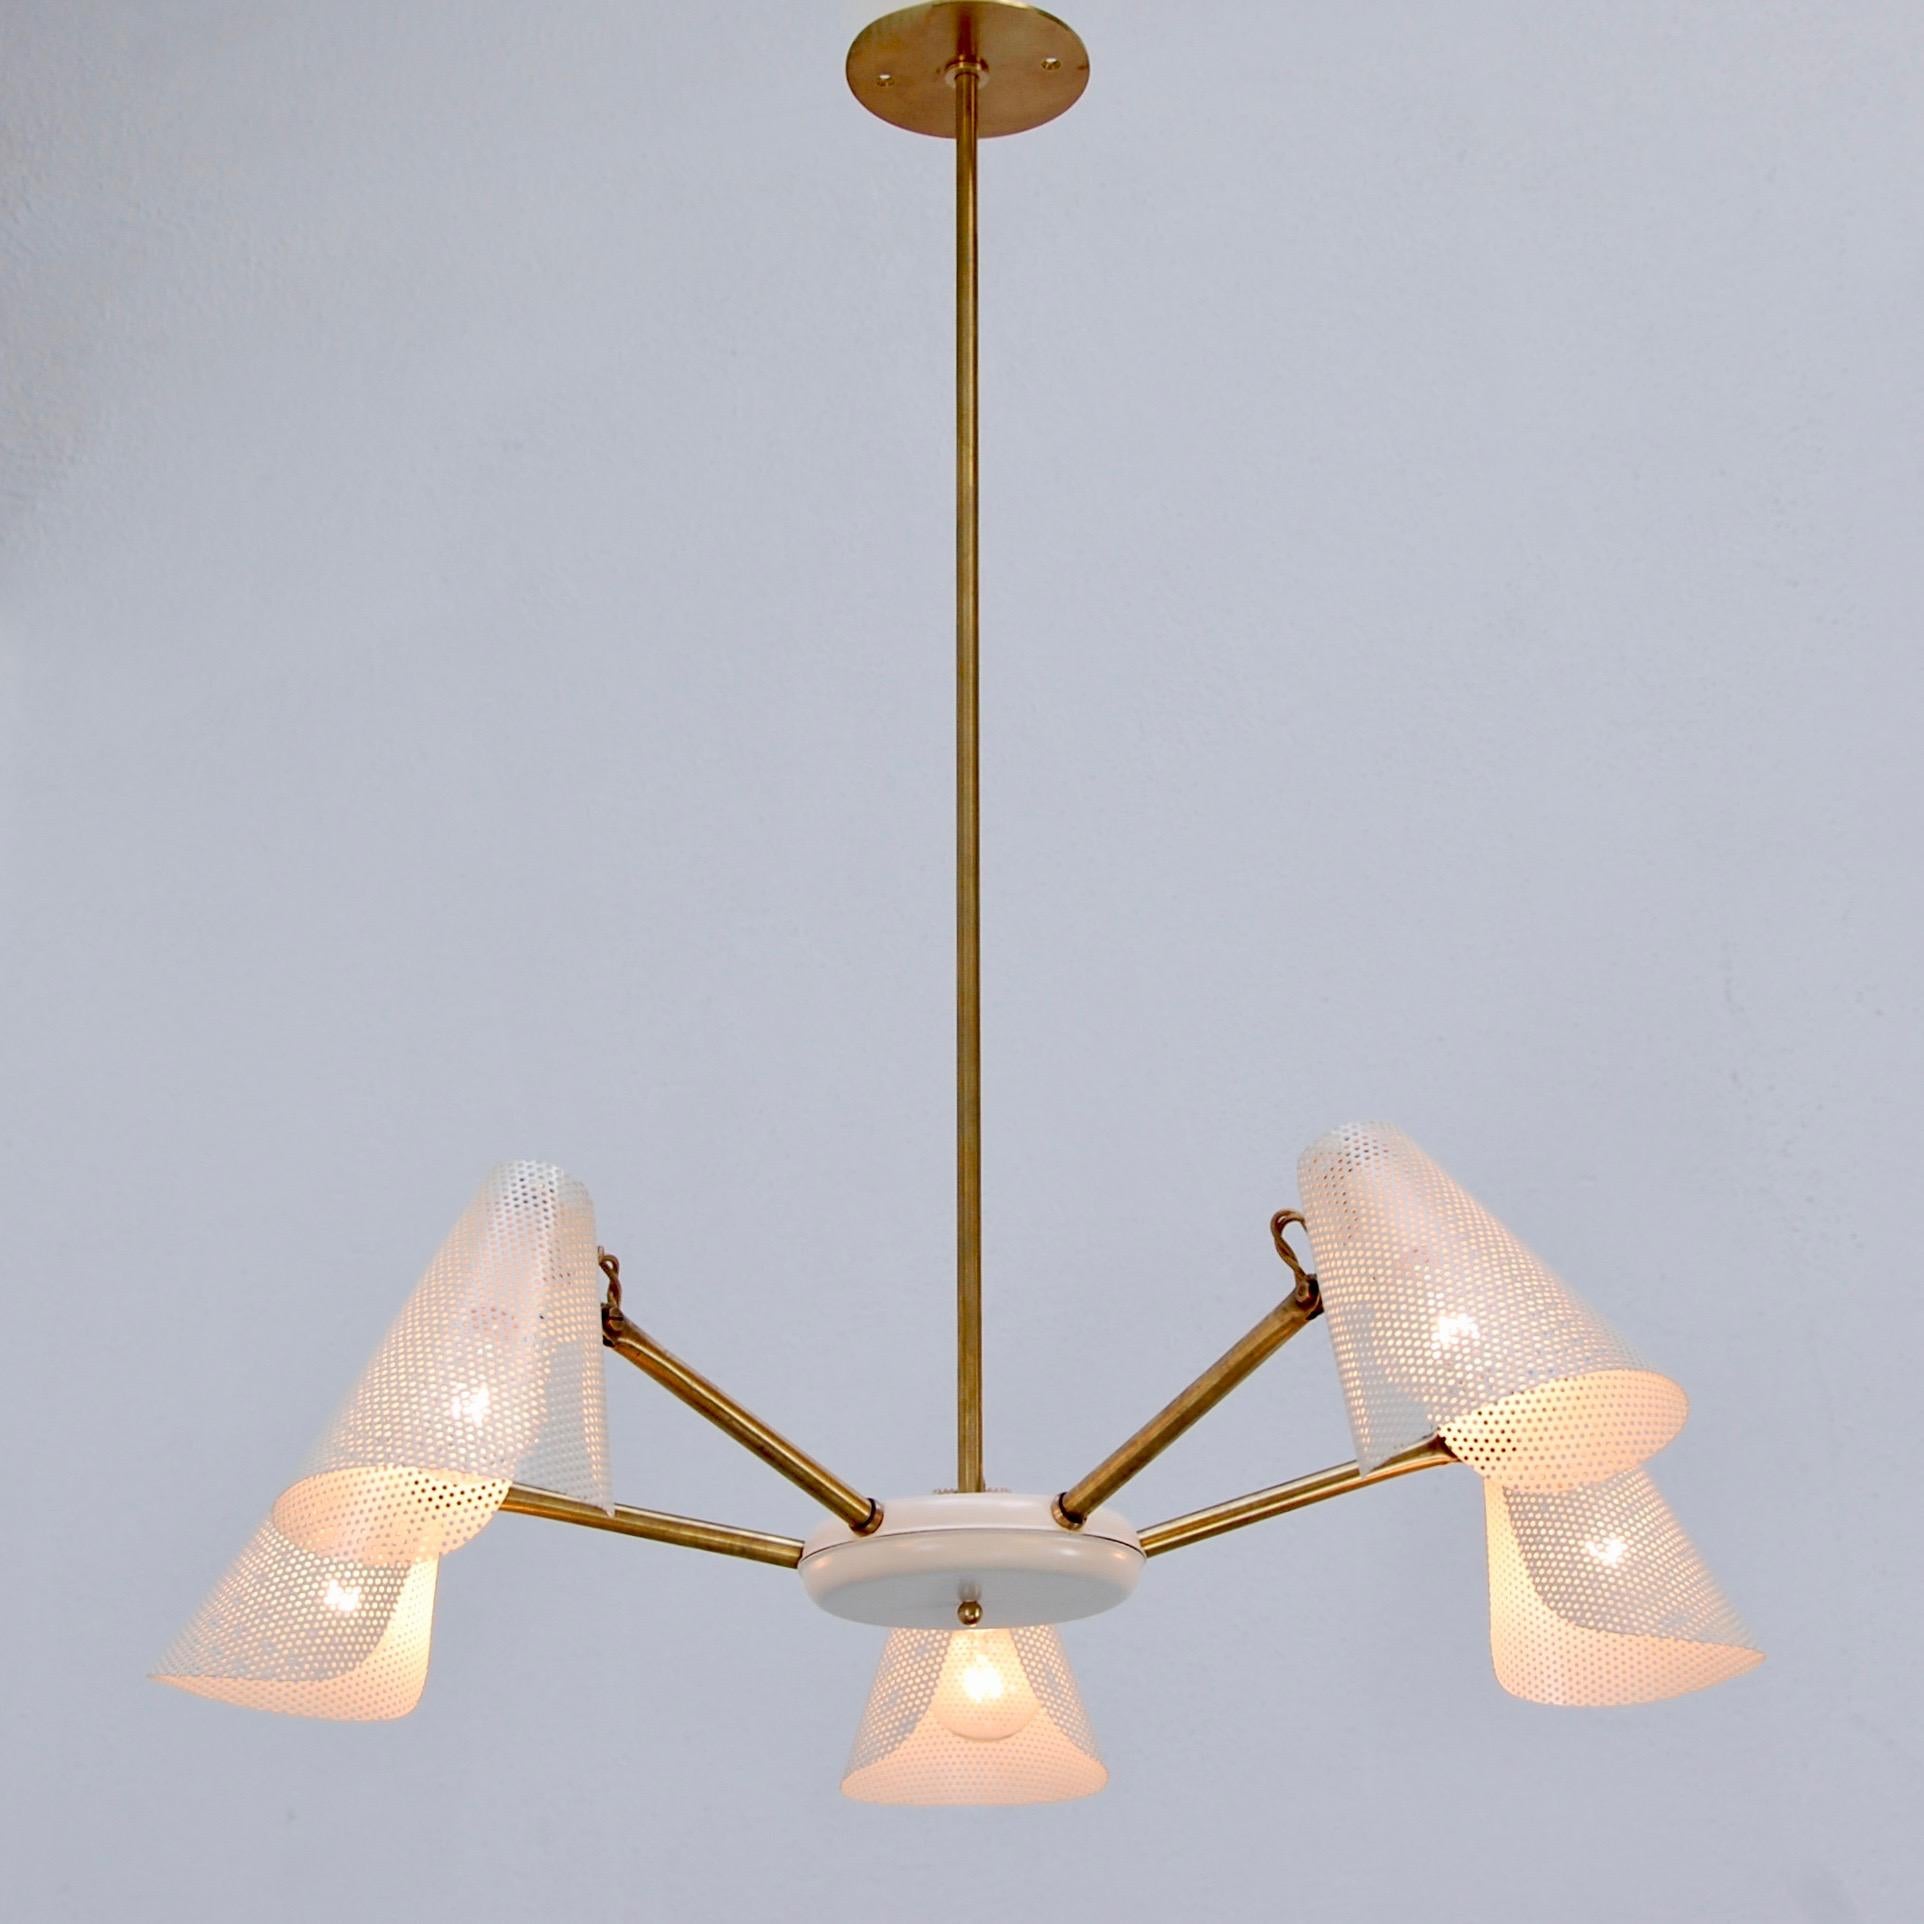 Classic midcentury (5) light perforated shade and brass chandelier from 1950s France. Aged brass patina. Wired for use in the US. Current OAD can be adjusted upon request. (5) Single E12 candelabra based light sockets. Light bulbs